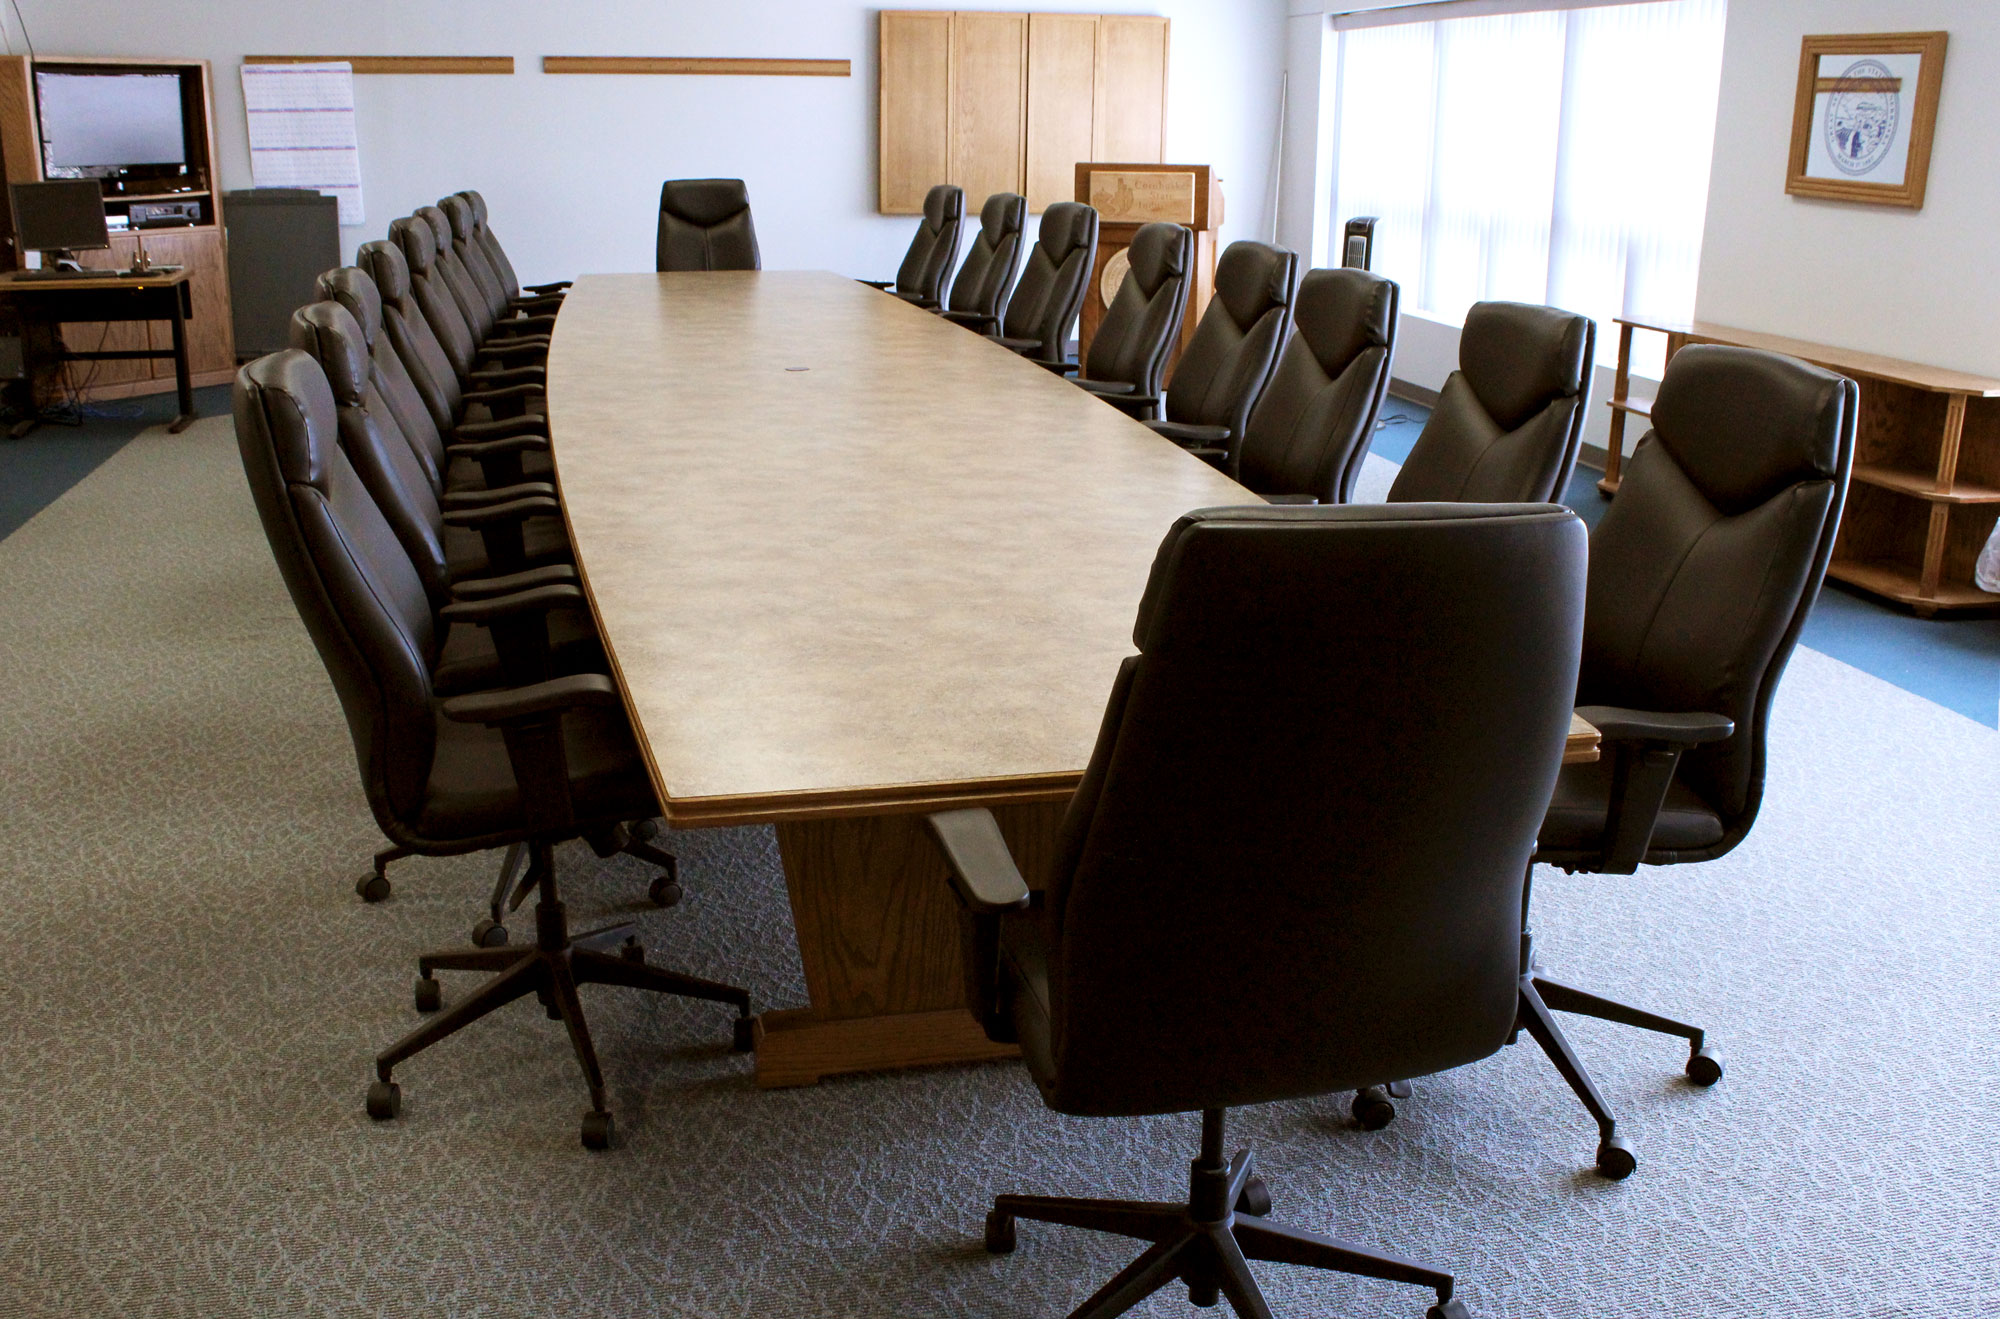 CSI Conference room with conference table and Delta chairs